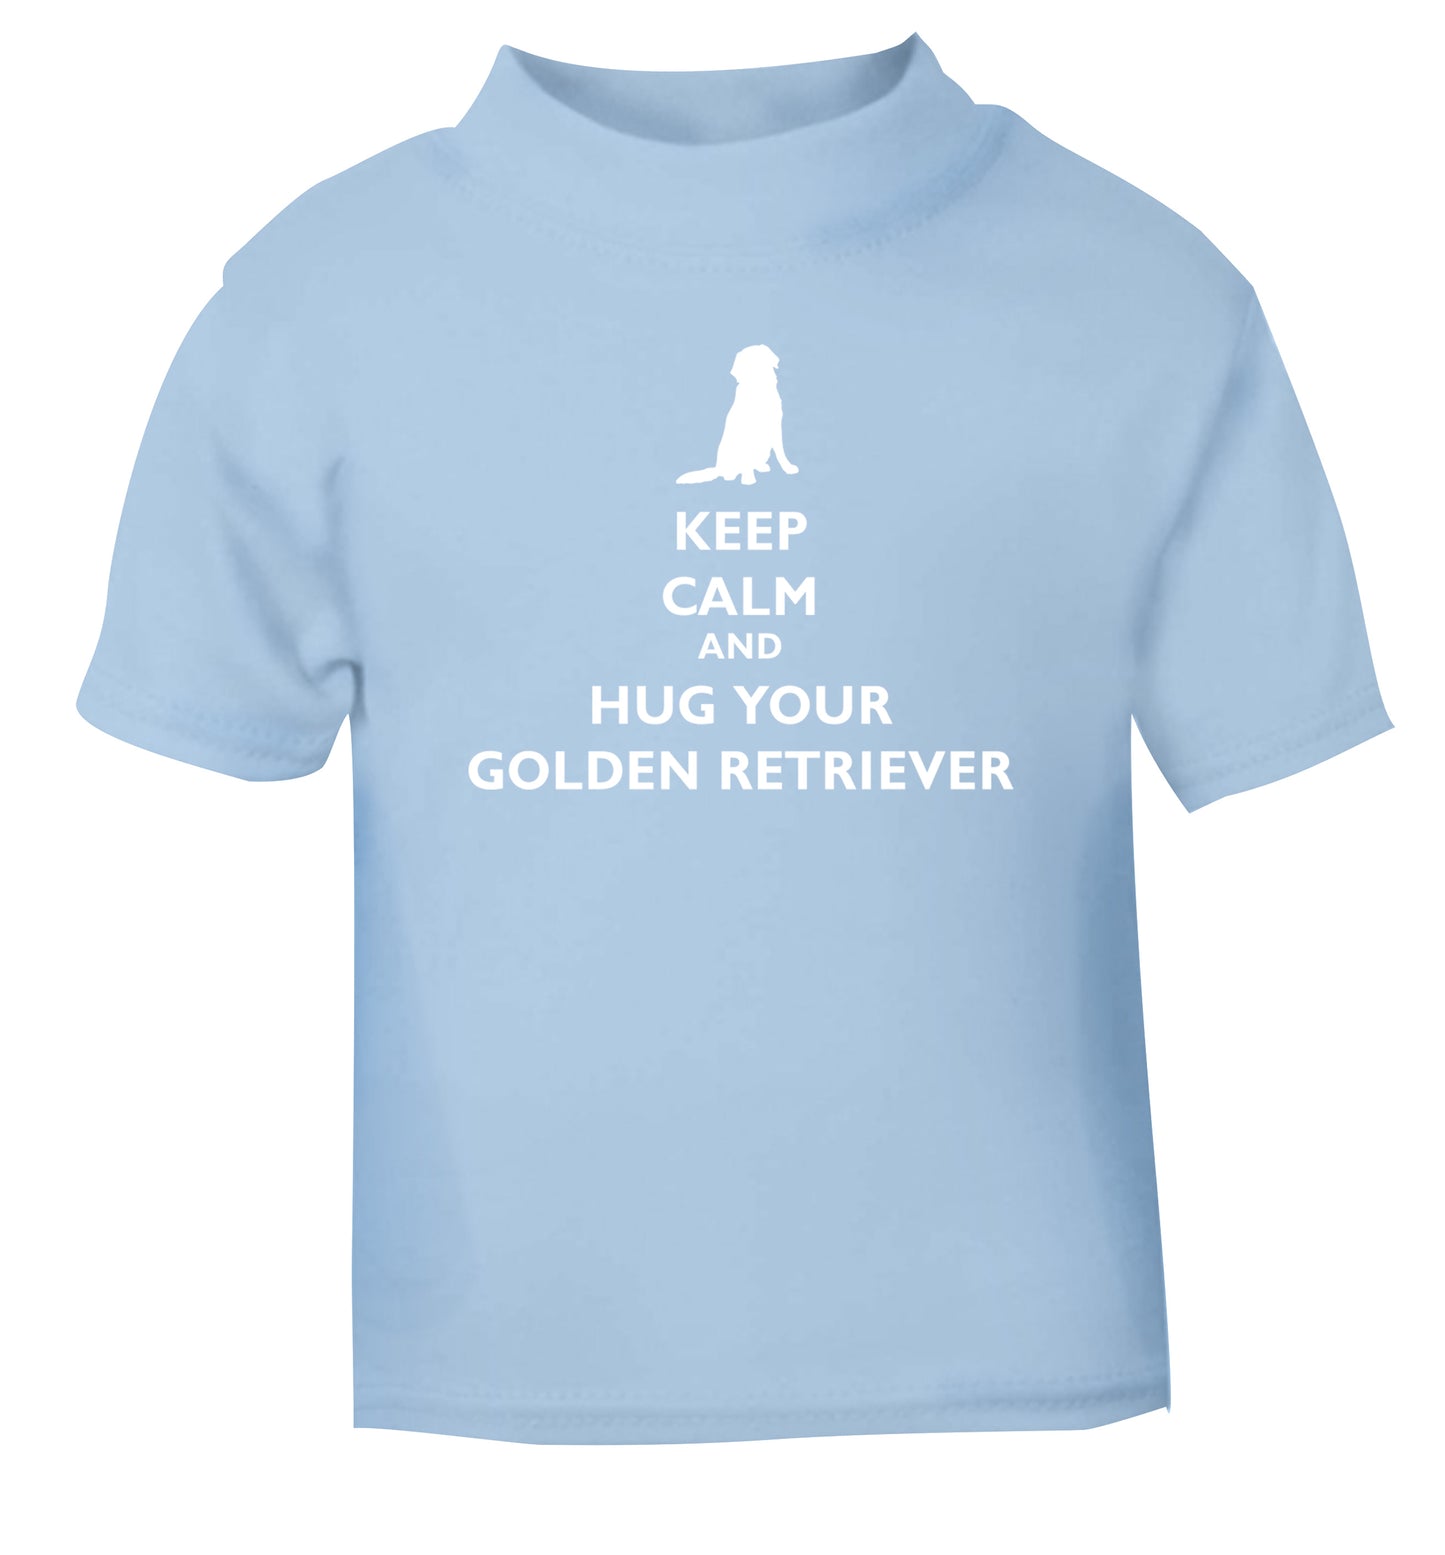 Keep calm and hug your golden retriever light blue Baby Toddler Tshirt 2 Years